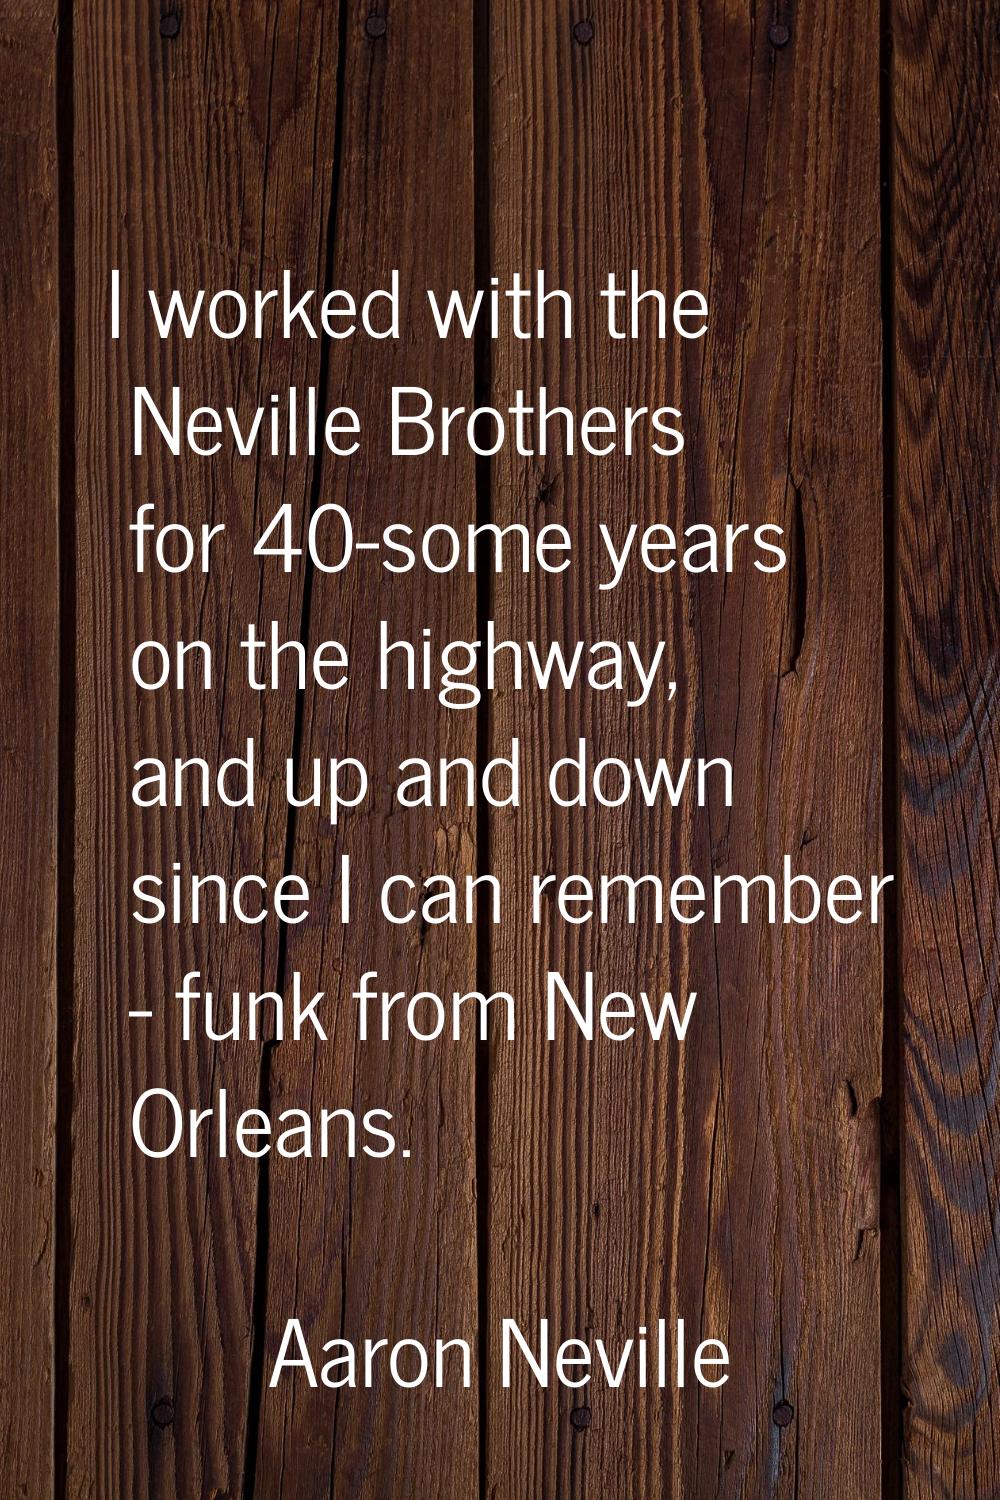 I worked with the Neville Brothers for 40-some years on the highway, and up and down since I can re